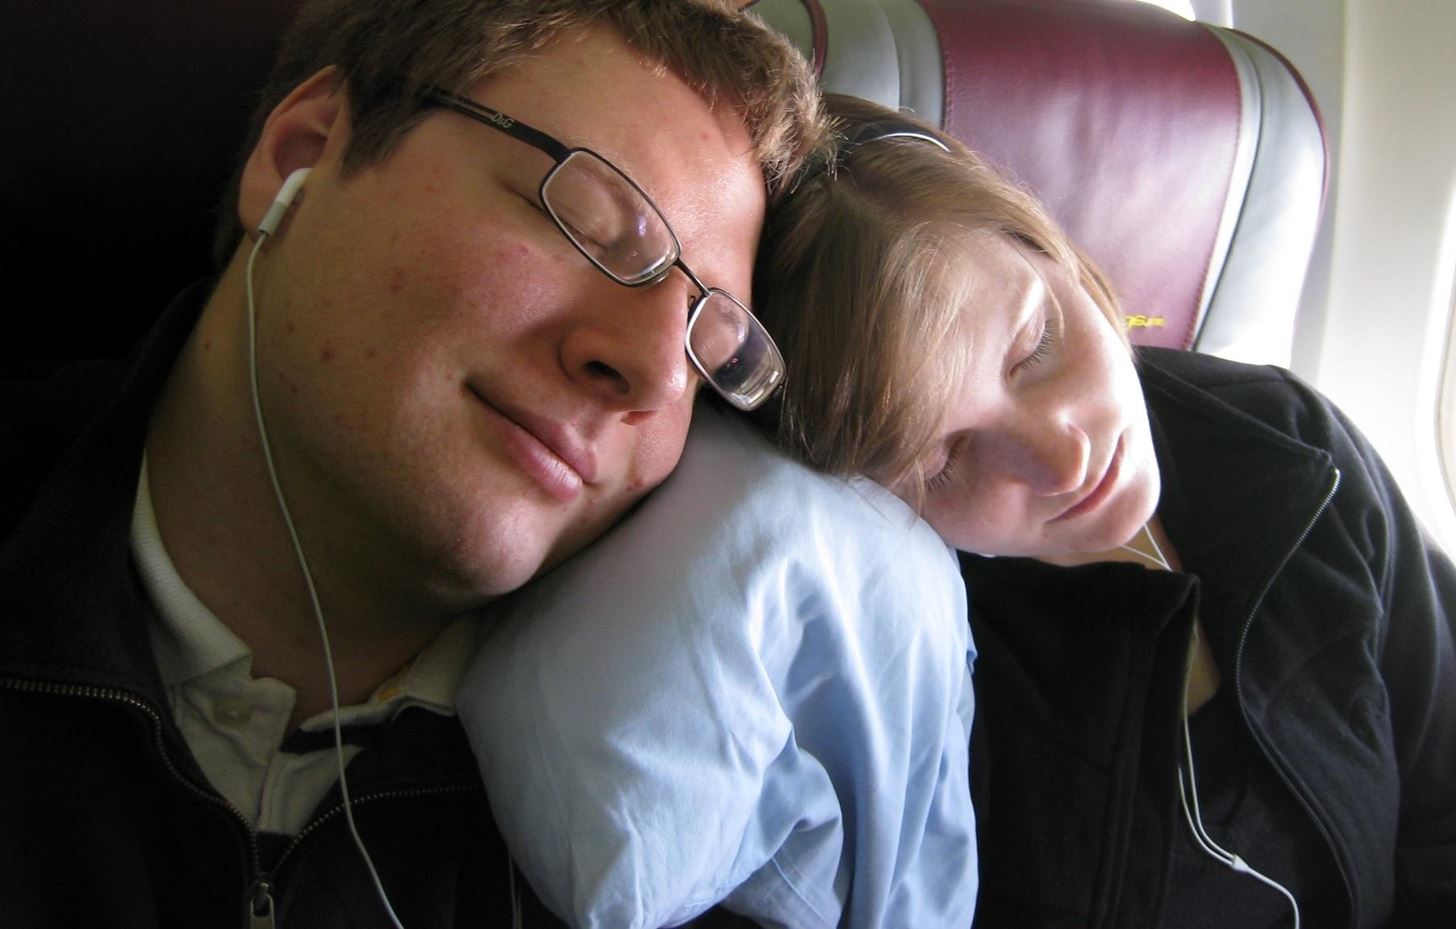 Sleep on Long Flights Like a Pro with These 13 Must-Know Tips